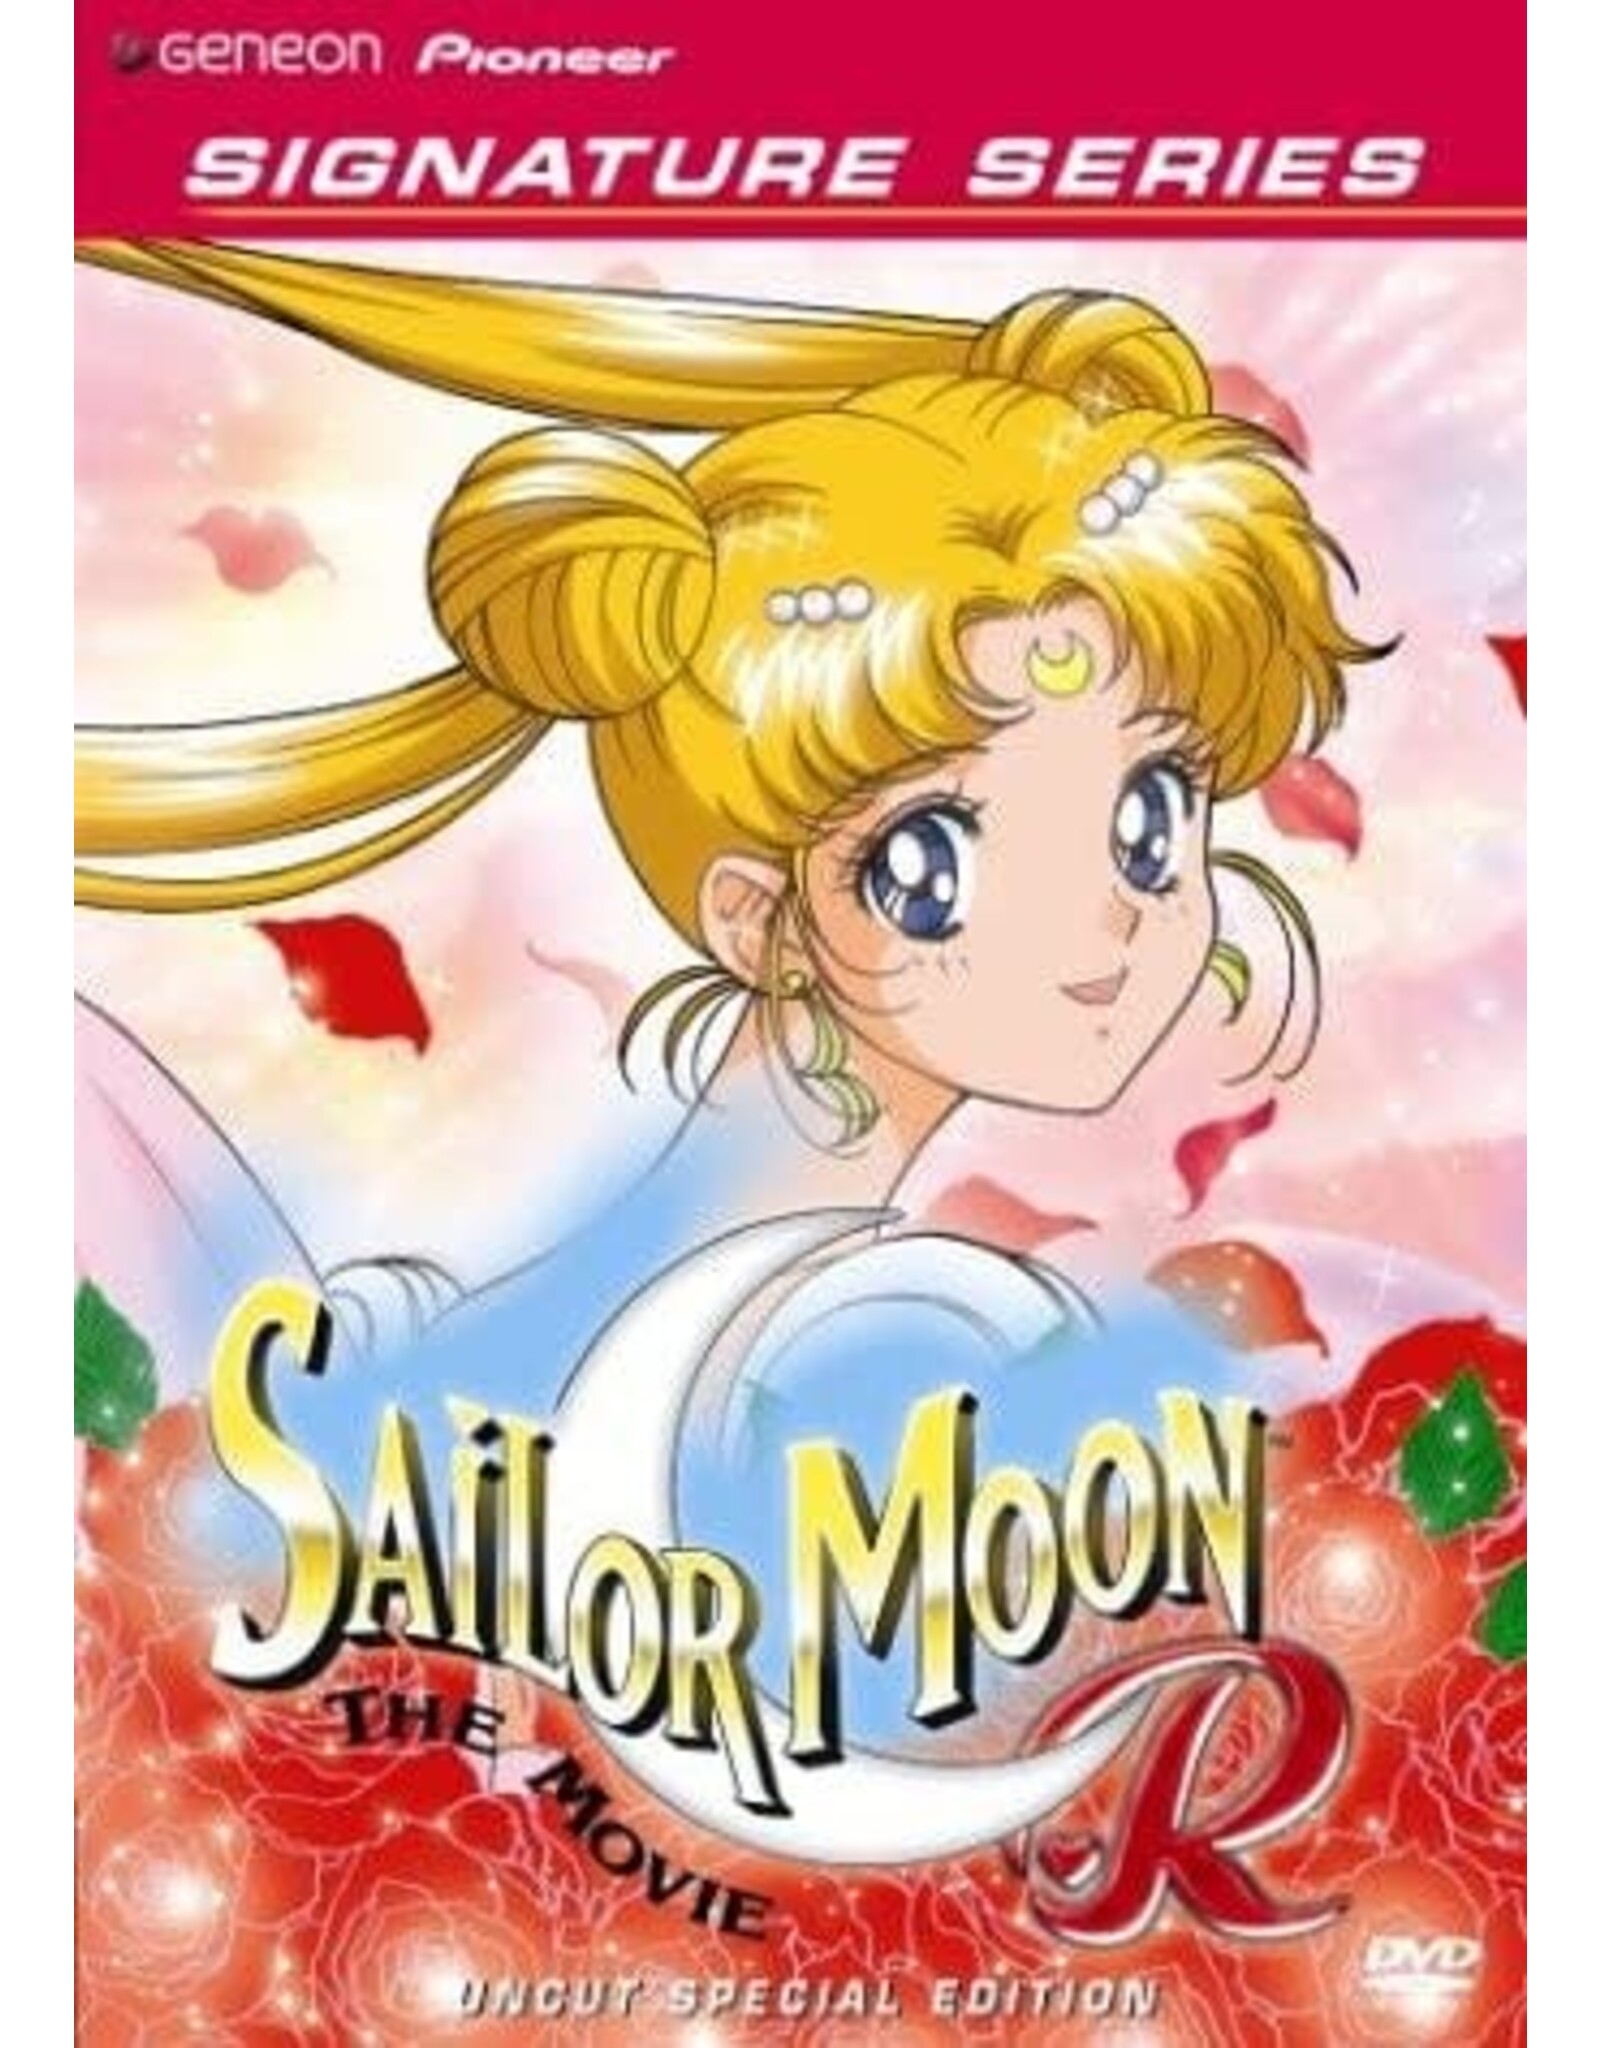 Anime & Animation Sailor Moon R The Movie - Uncut Special Edition (Used)